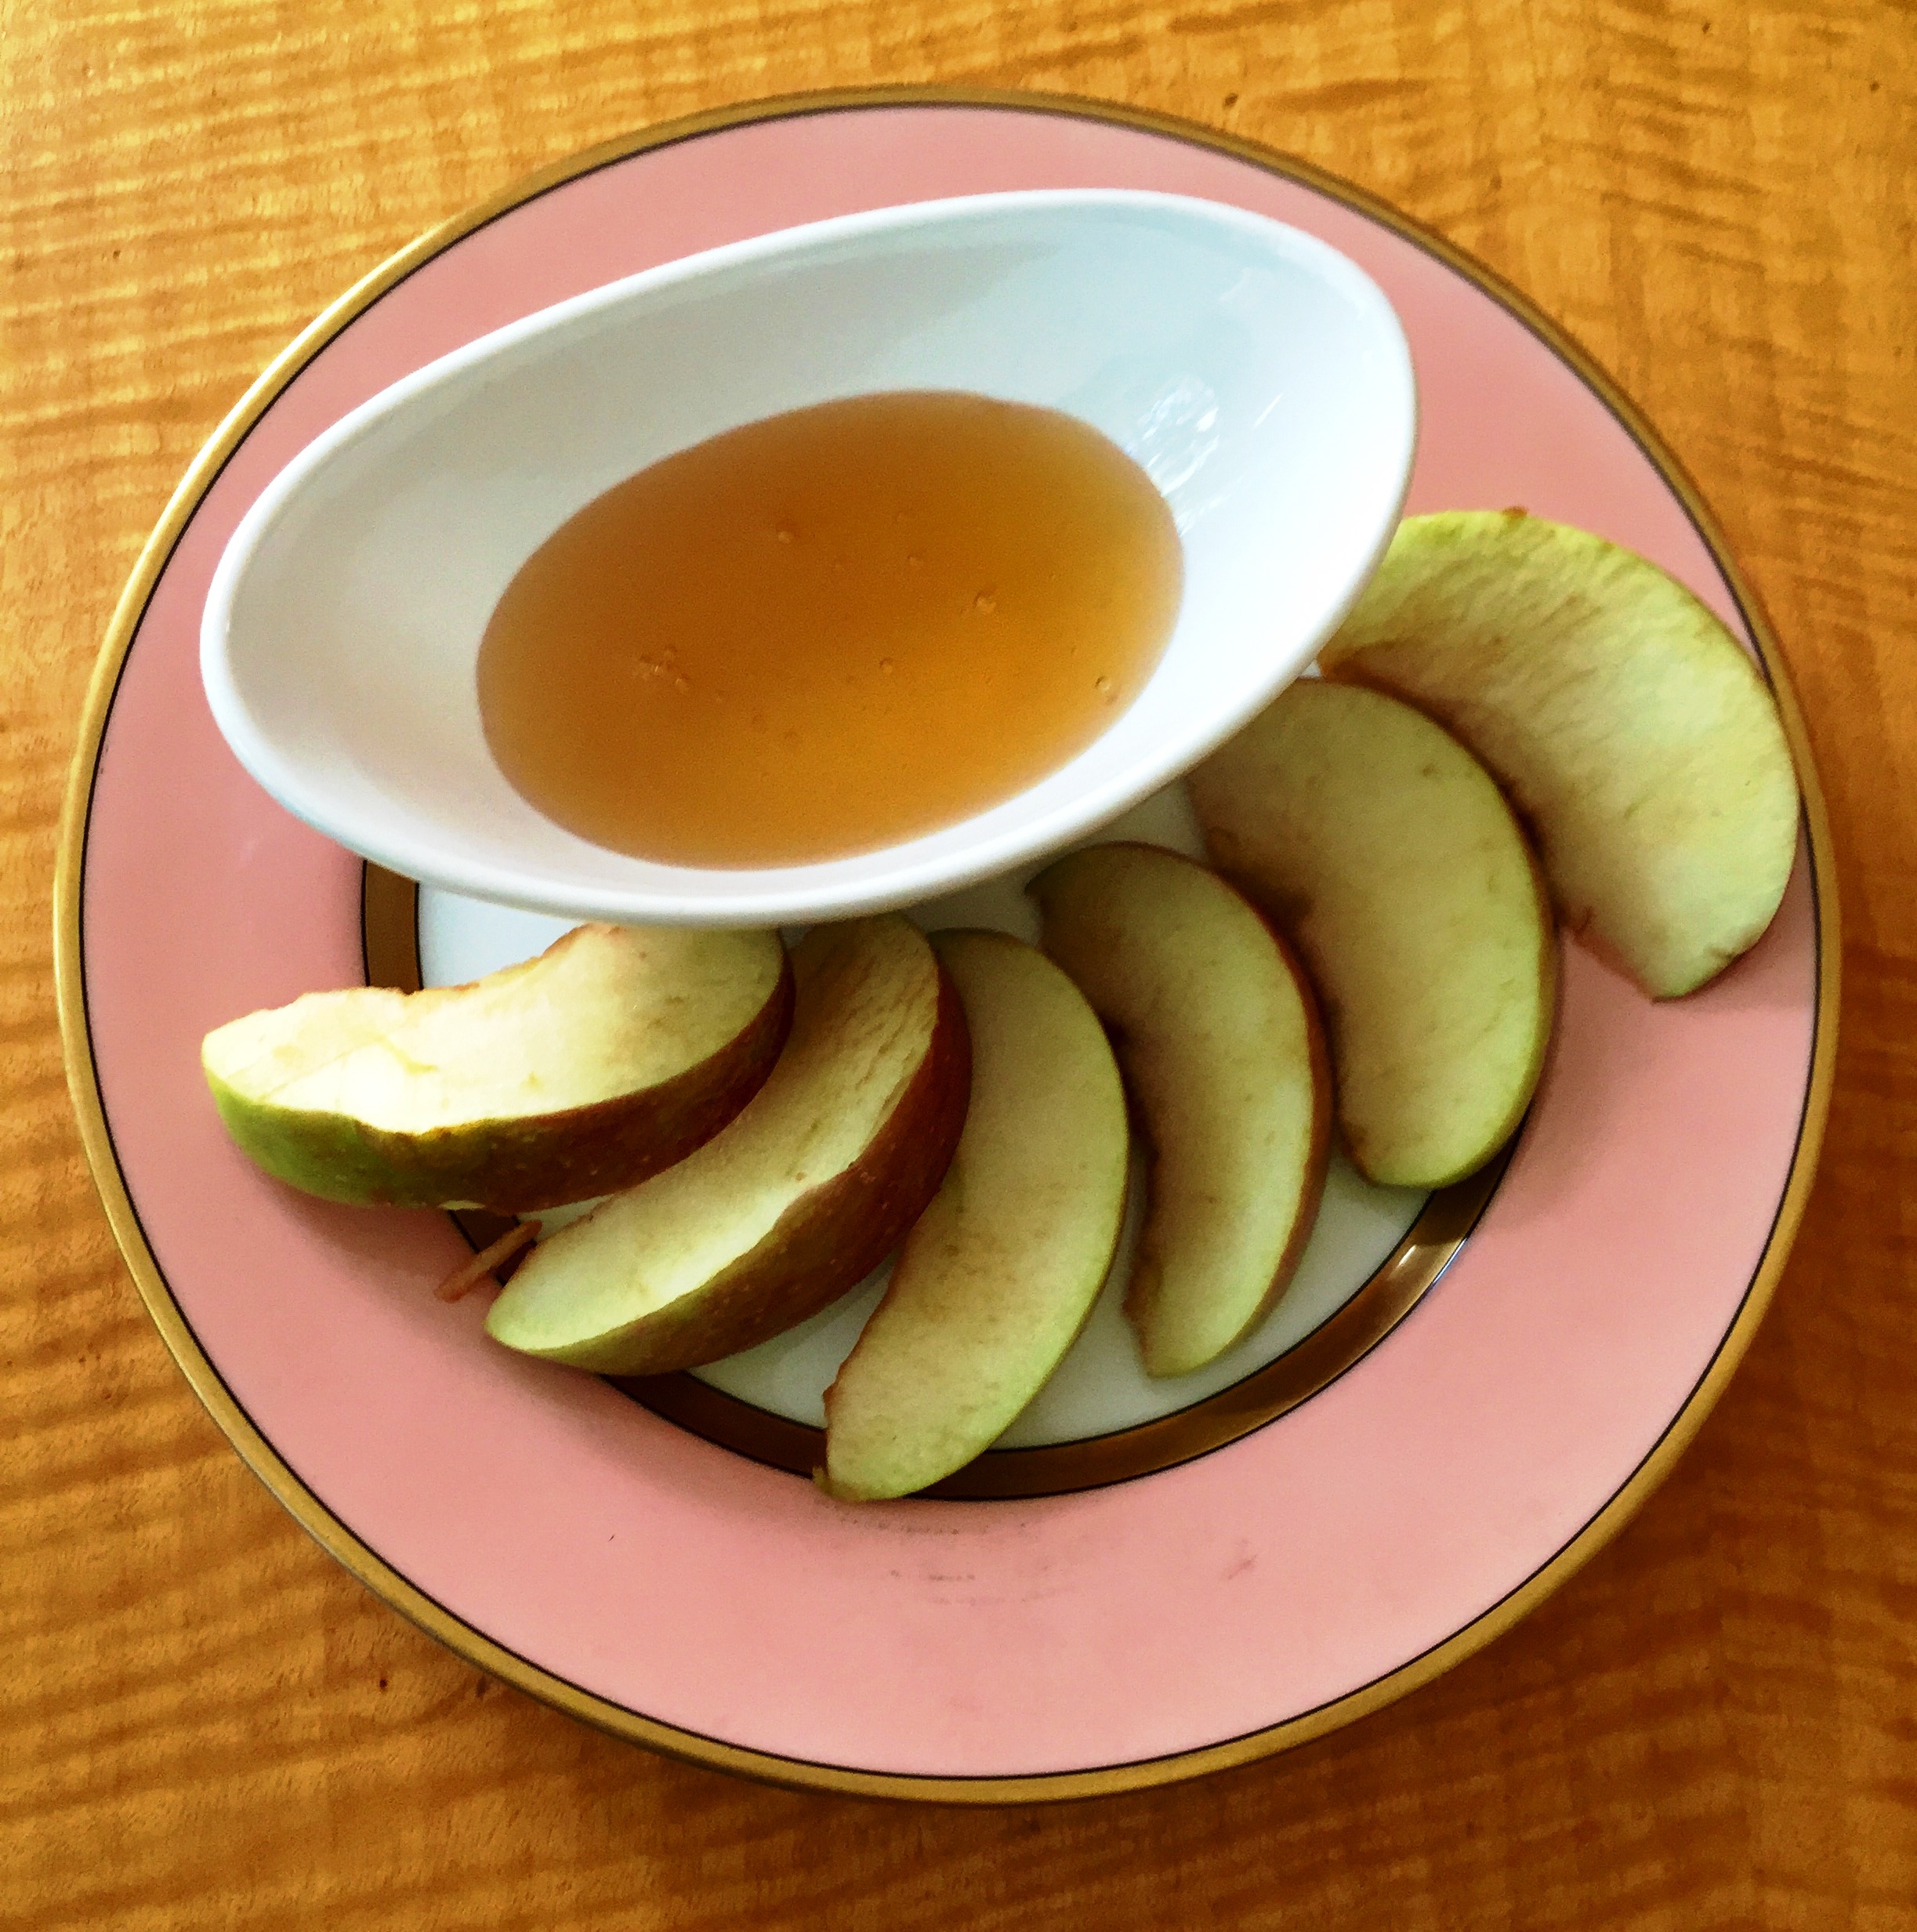 Apples and honey for a sweet new year.jpg